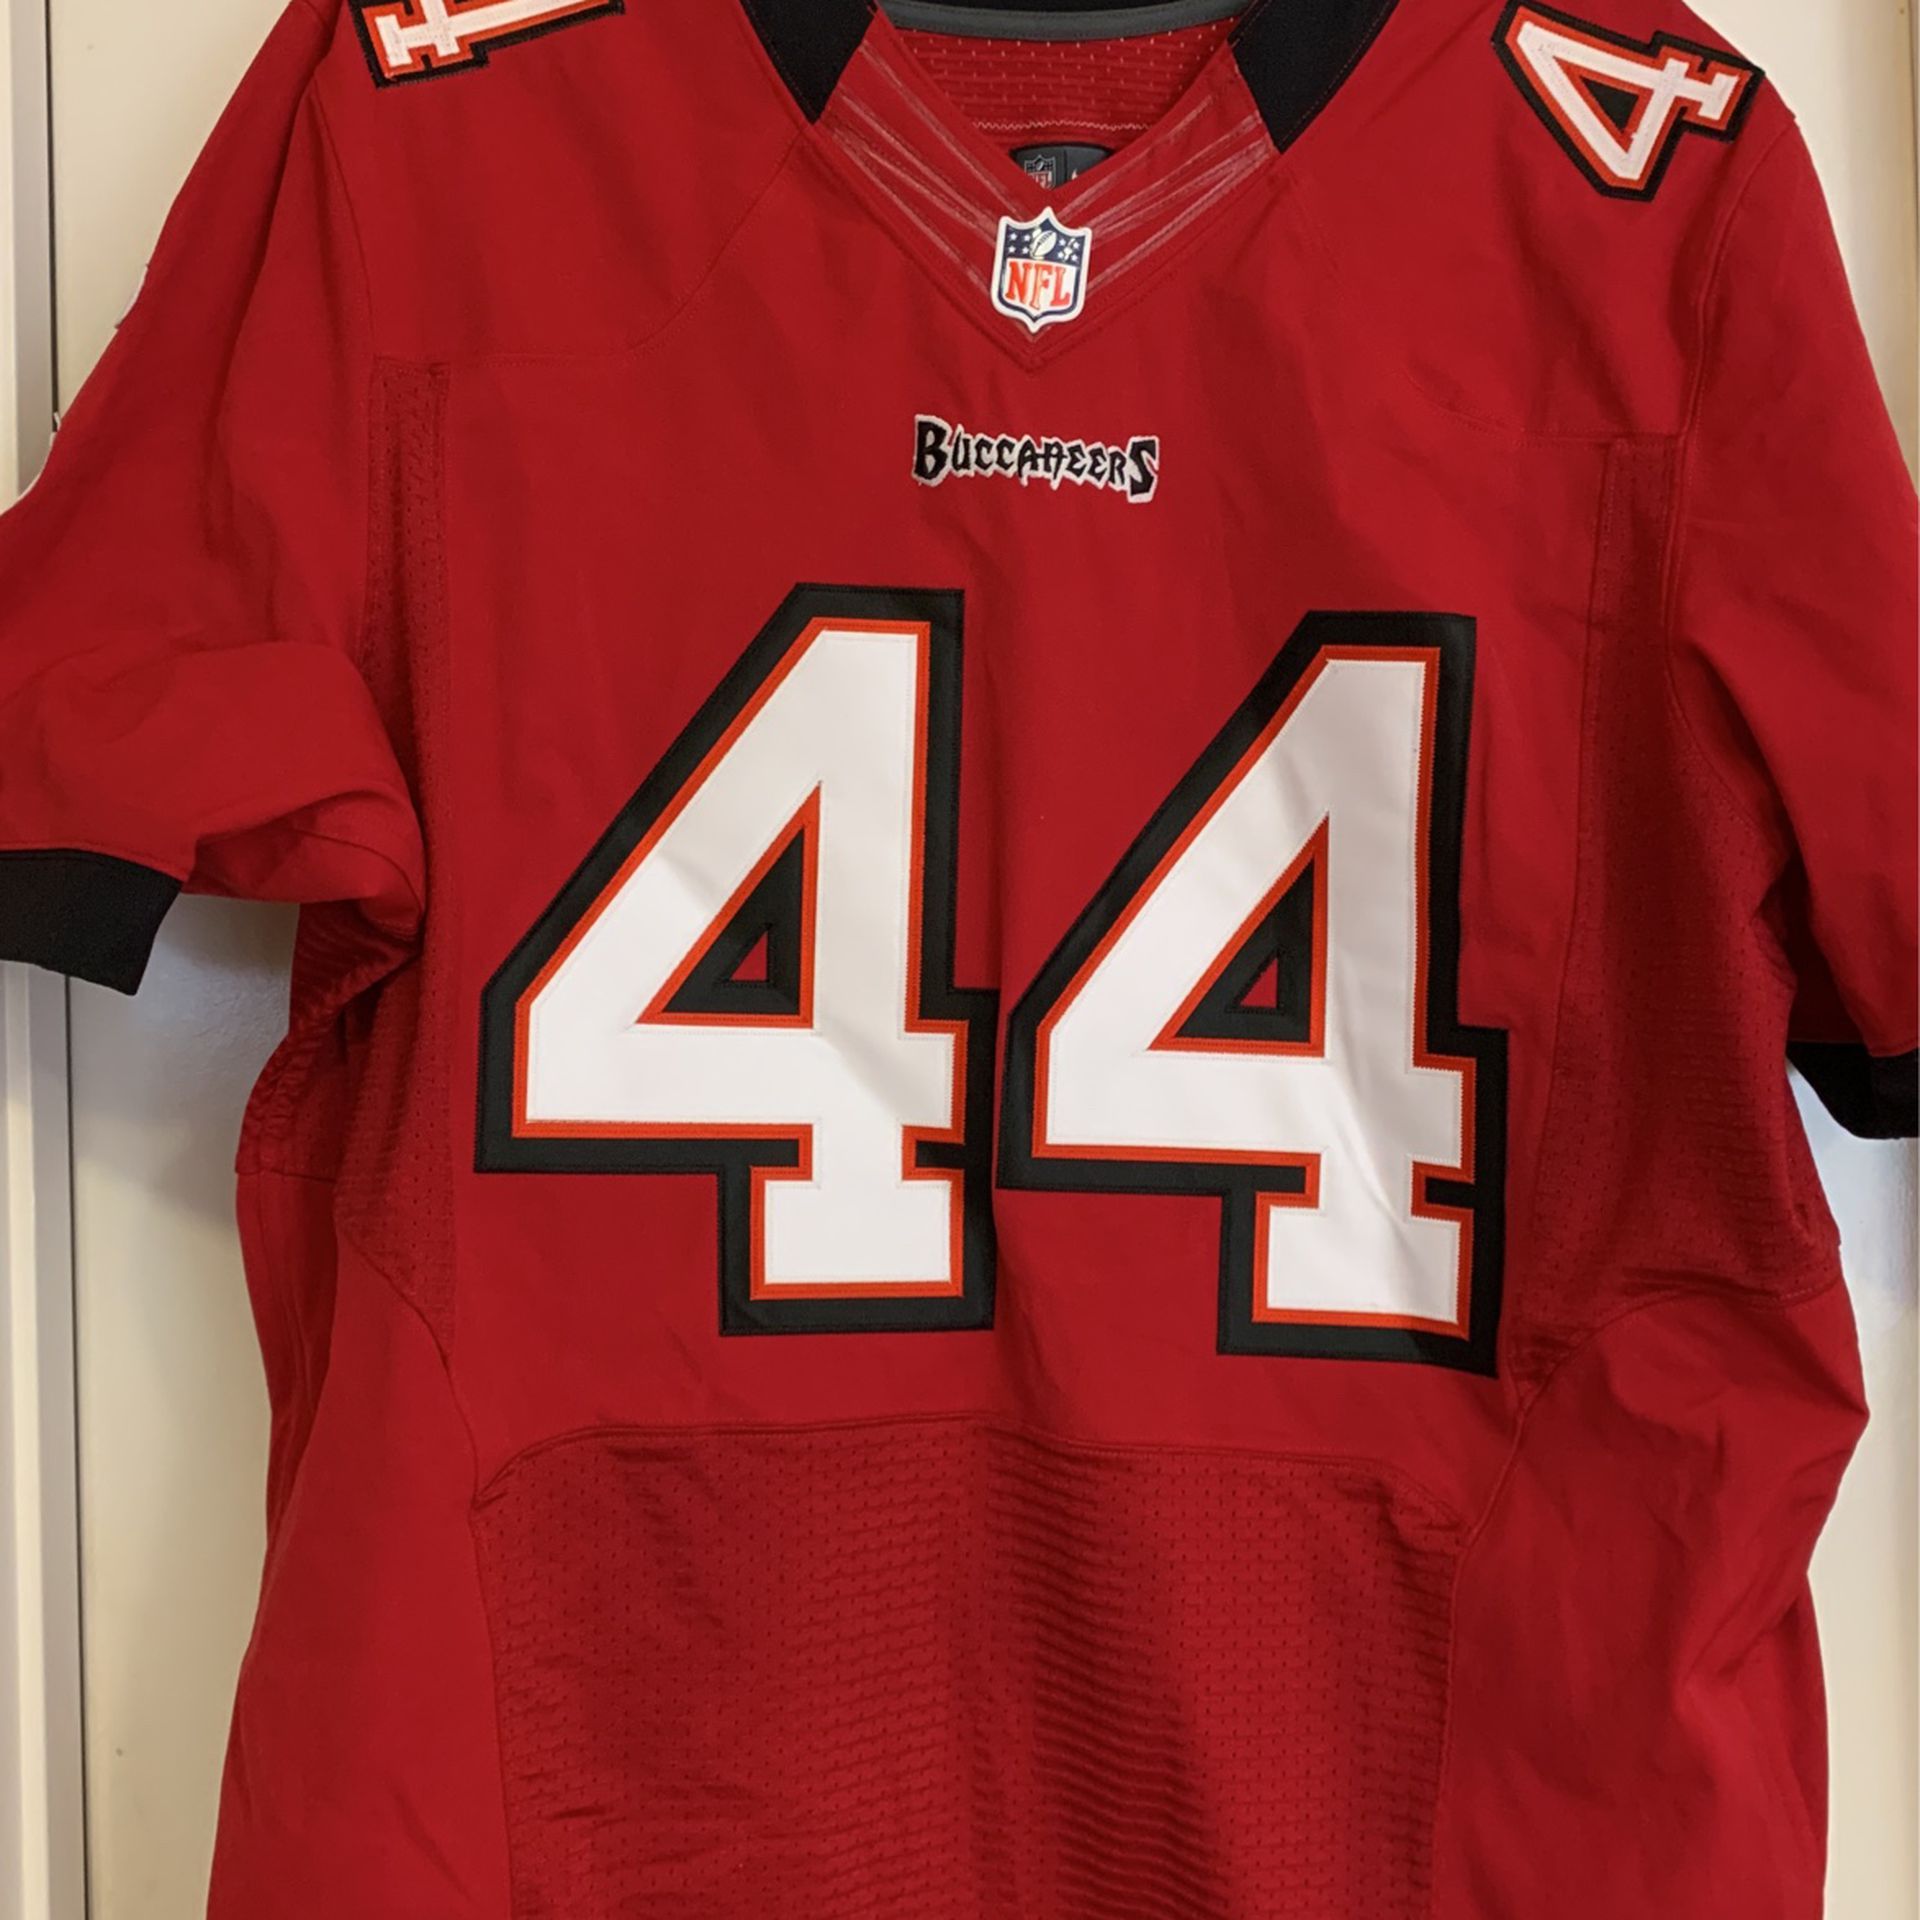 Used Authentic Nike Elite Buccaneers NFL Jersey for Sale in Lancaster, CA -  OfferUp